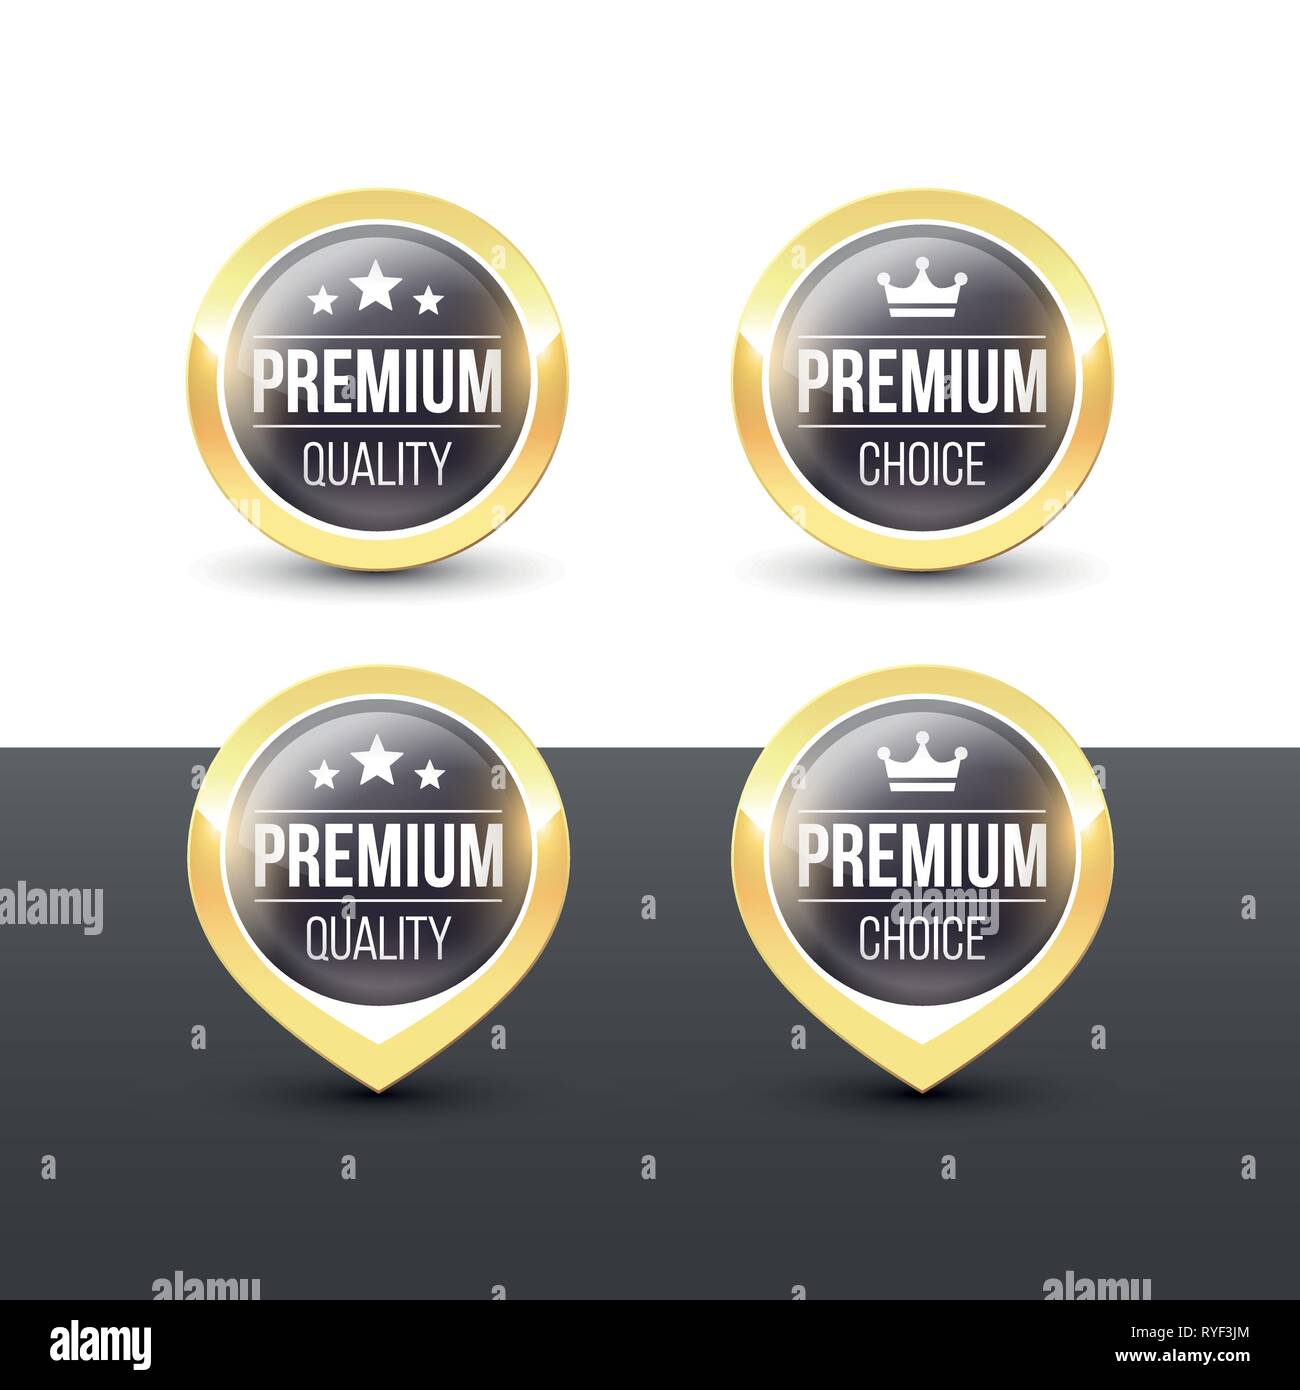 Black round PREMIUM buttons and pointers with metallic gold border. Vector label icons isolated on white background. Stock Vector